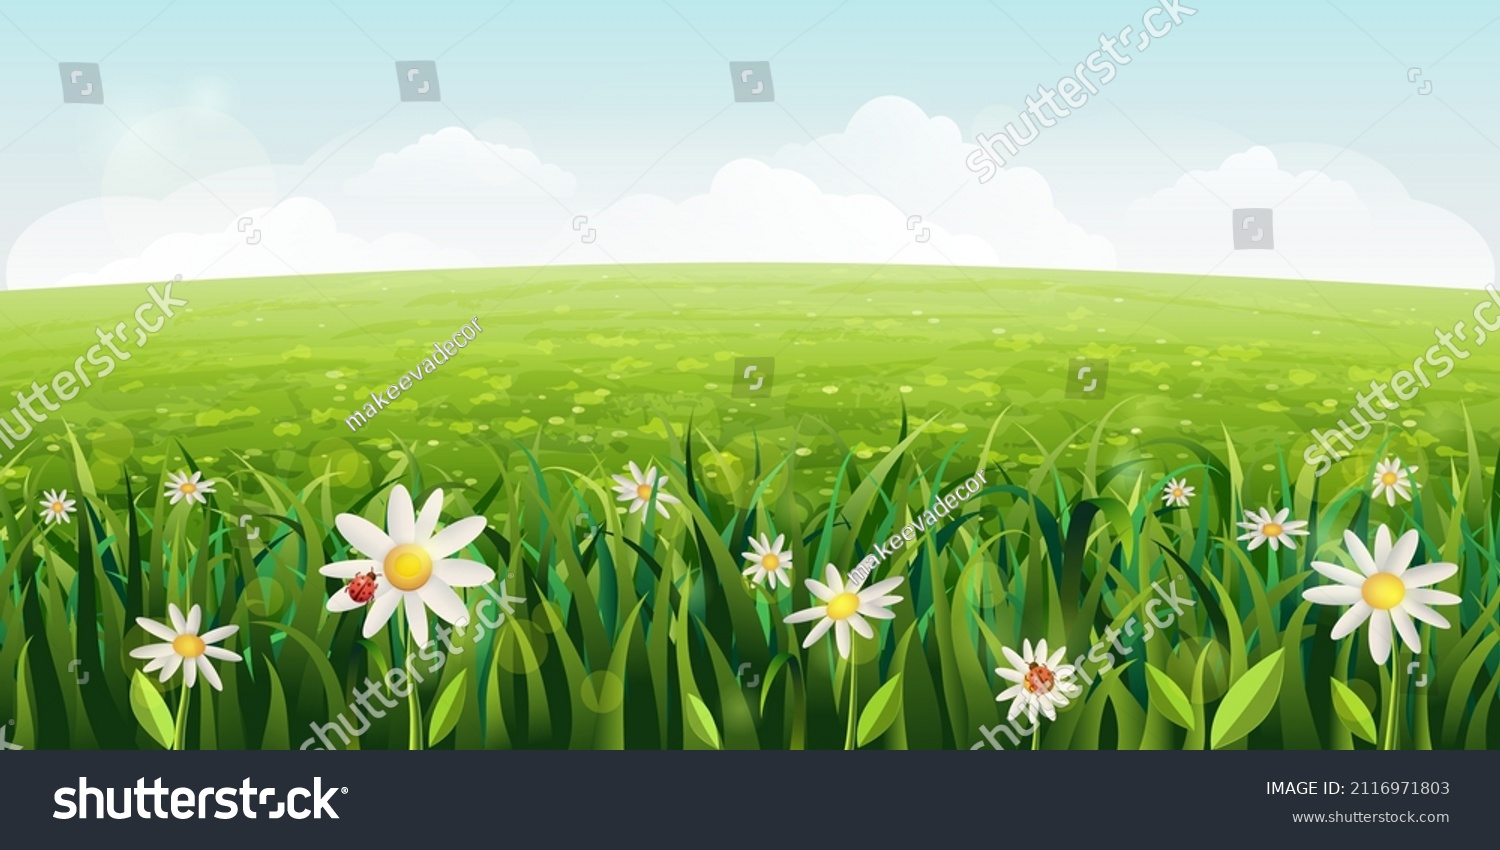 horizontal daisies field landscape. green Summer scene with white flowers, grass. sunny idyllic realistic spring background with daisies, green meadows, rural fields, valleys. blue sky, fluffy clouds #2116971803